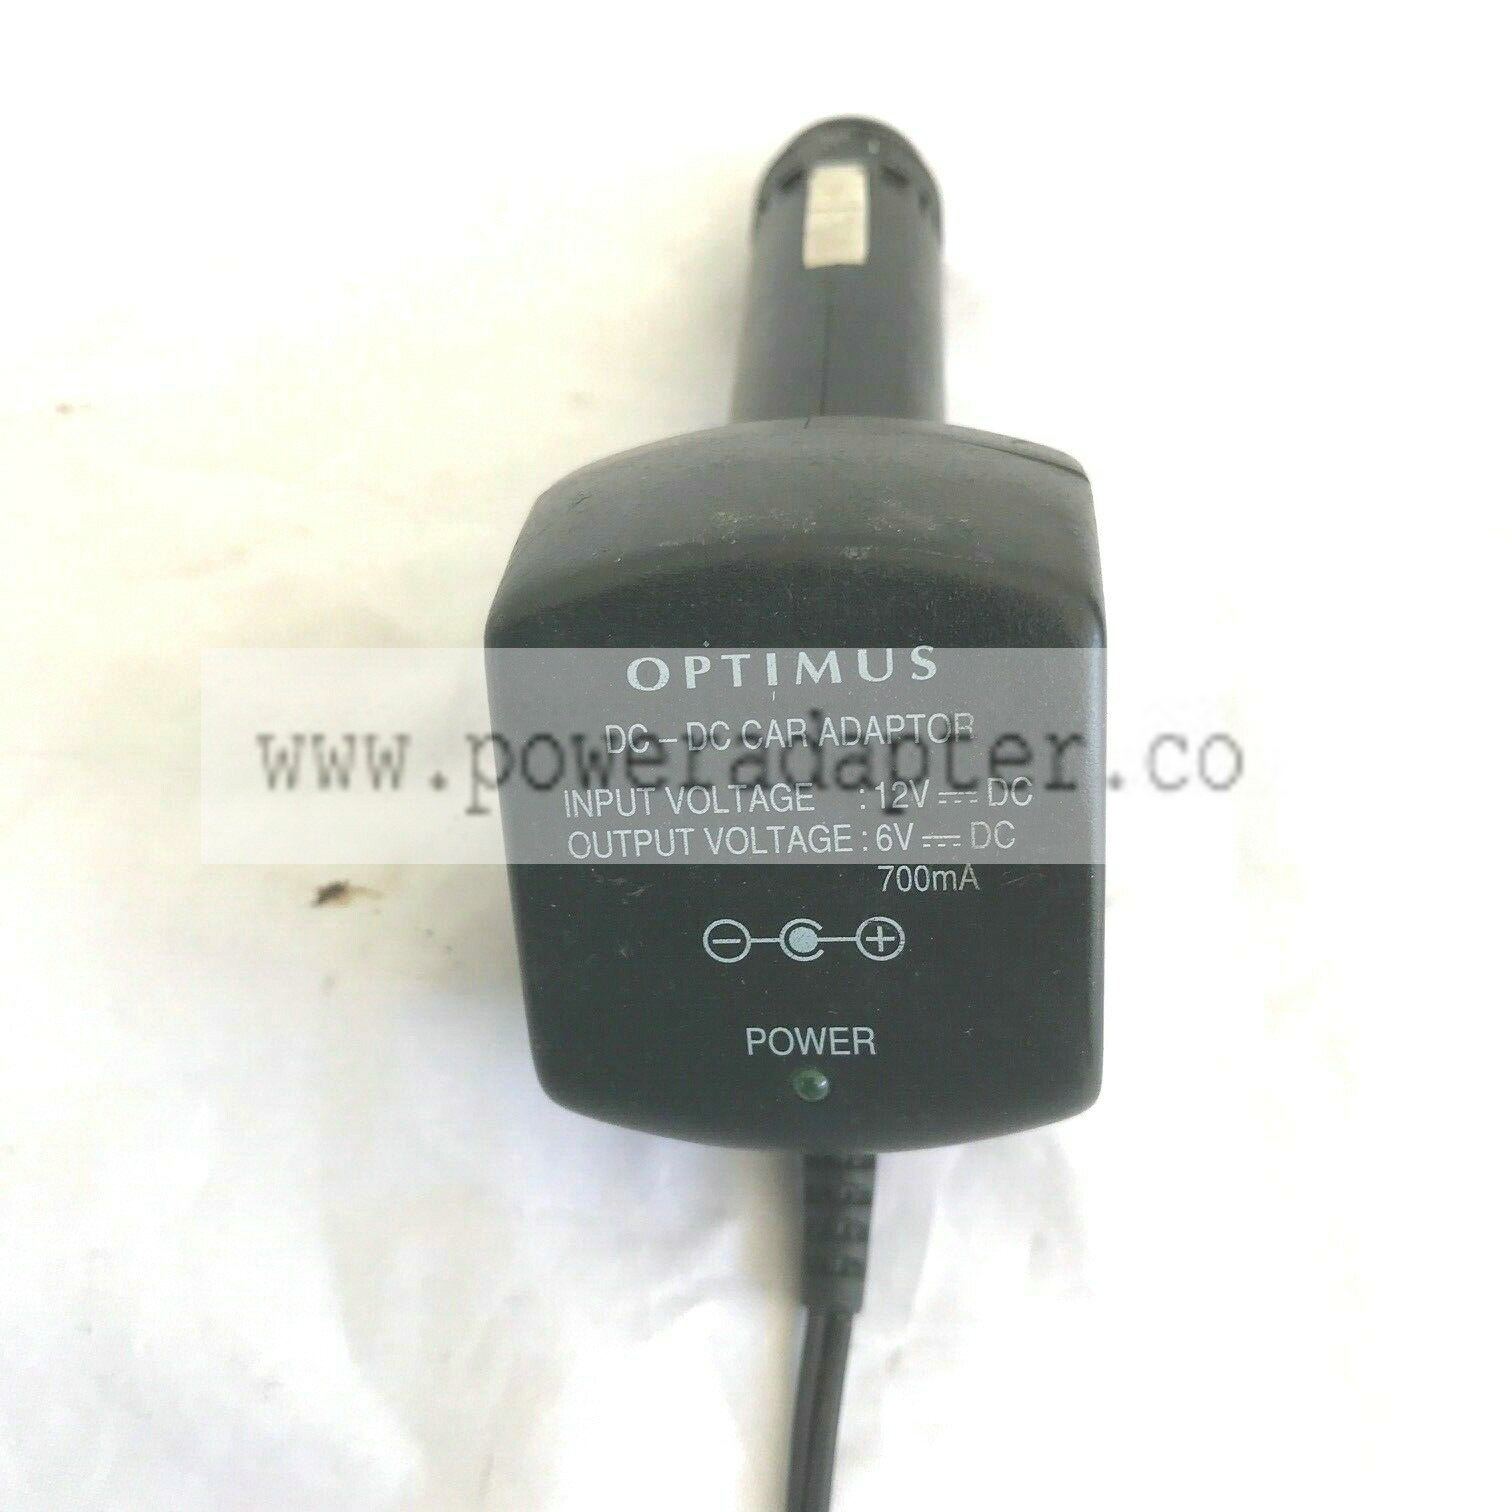 Optimus DC-DC Car Adapter I: 12 DC O: 6V DC 700mA Condition This item is a refurbished item and might have some scr